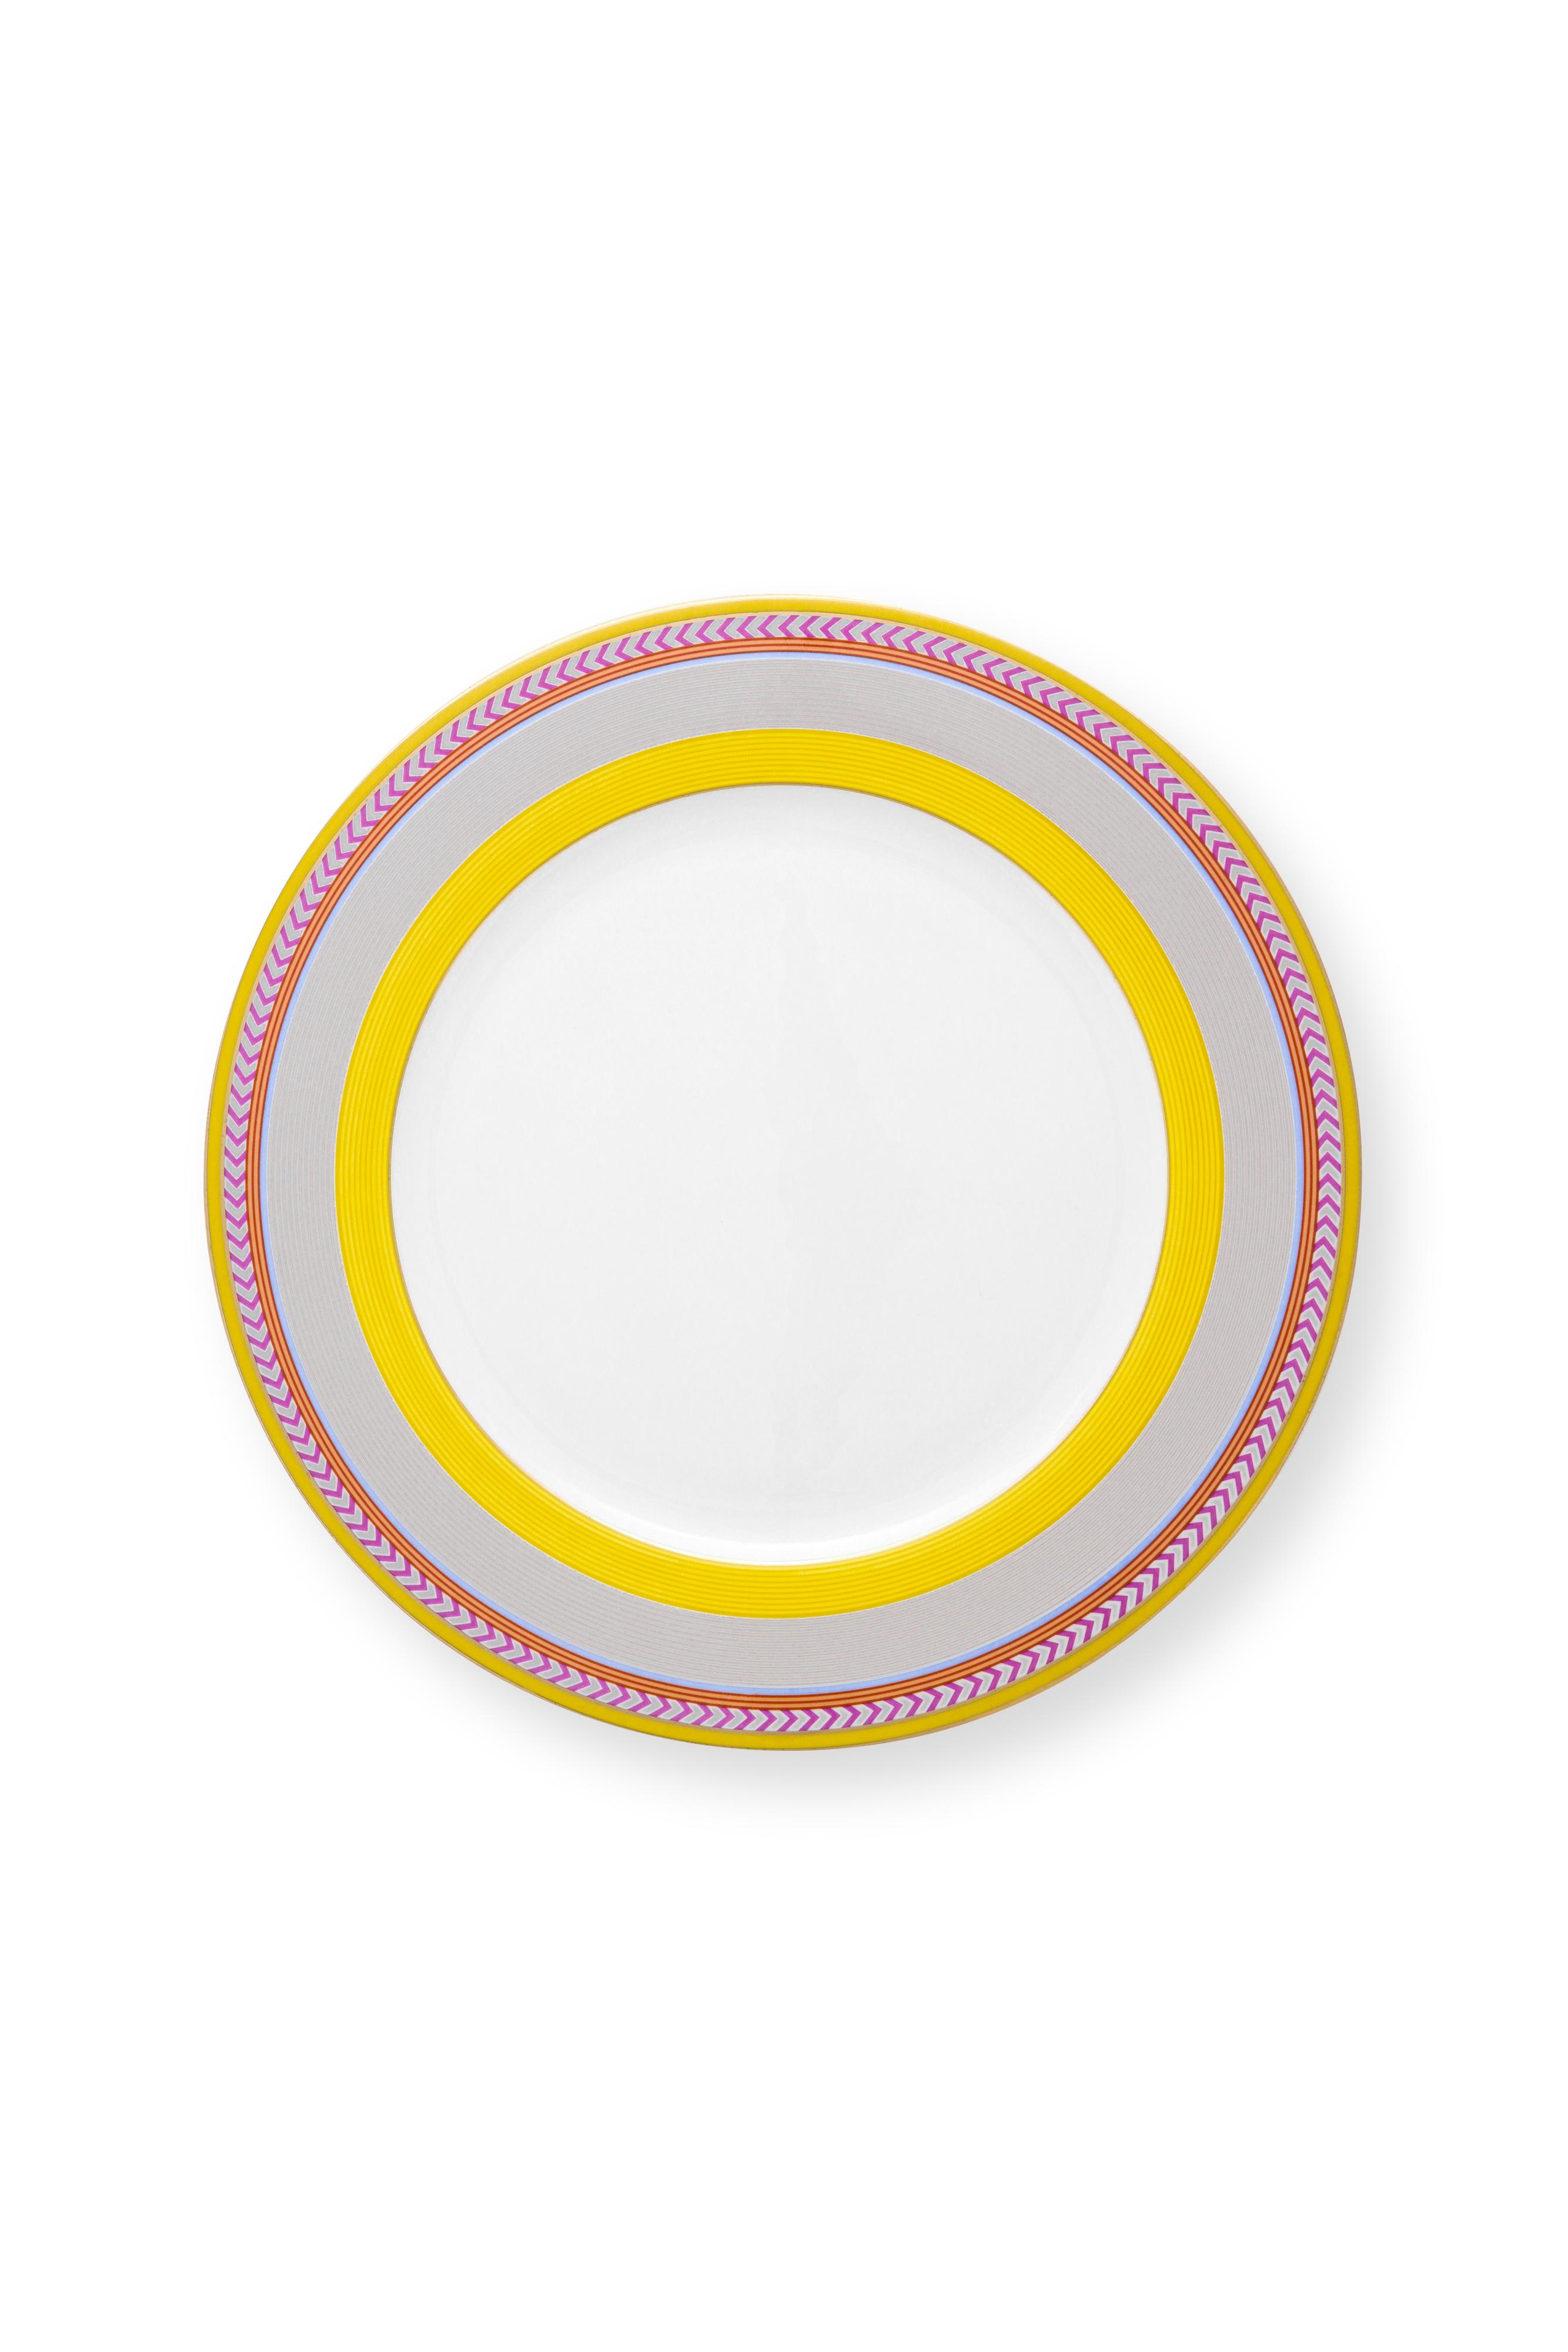 Plate Pip Chique Stripes Yellow 28cm Gift